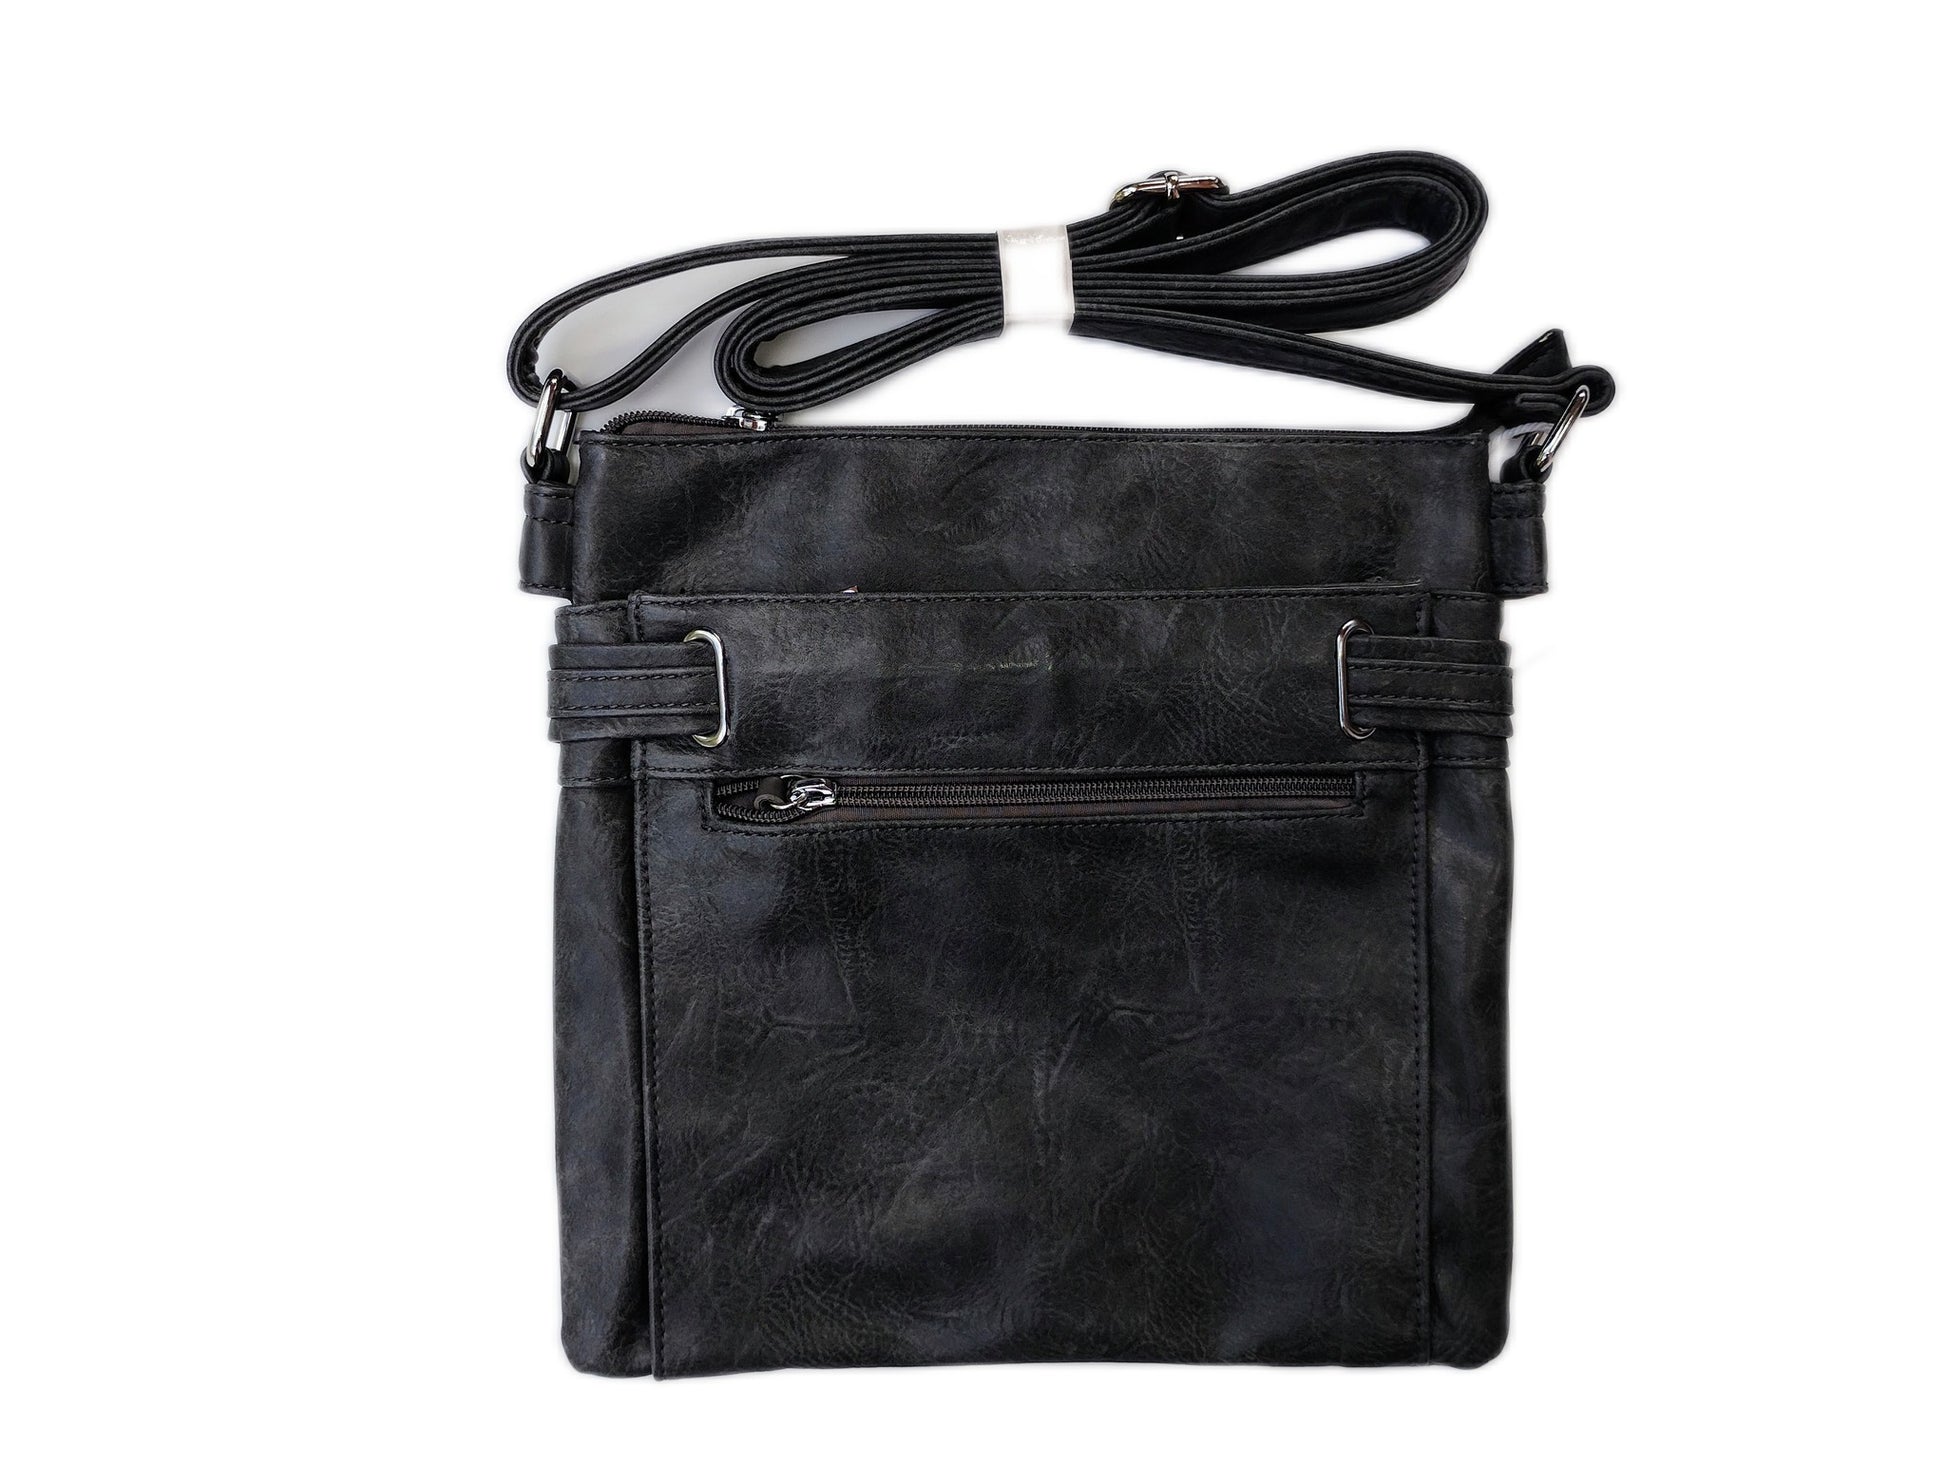 Long and Son. Women's Crossbody Shoulder Bag with adjustable strap. Colour Dark Grey.